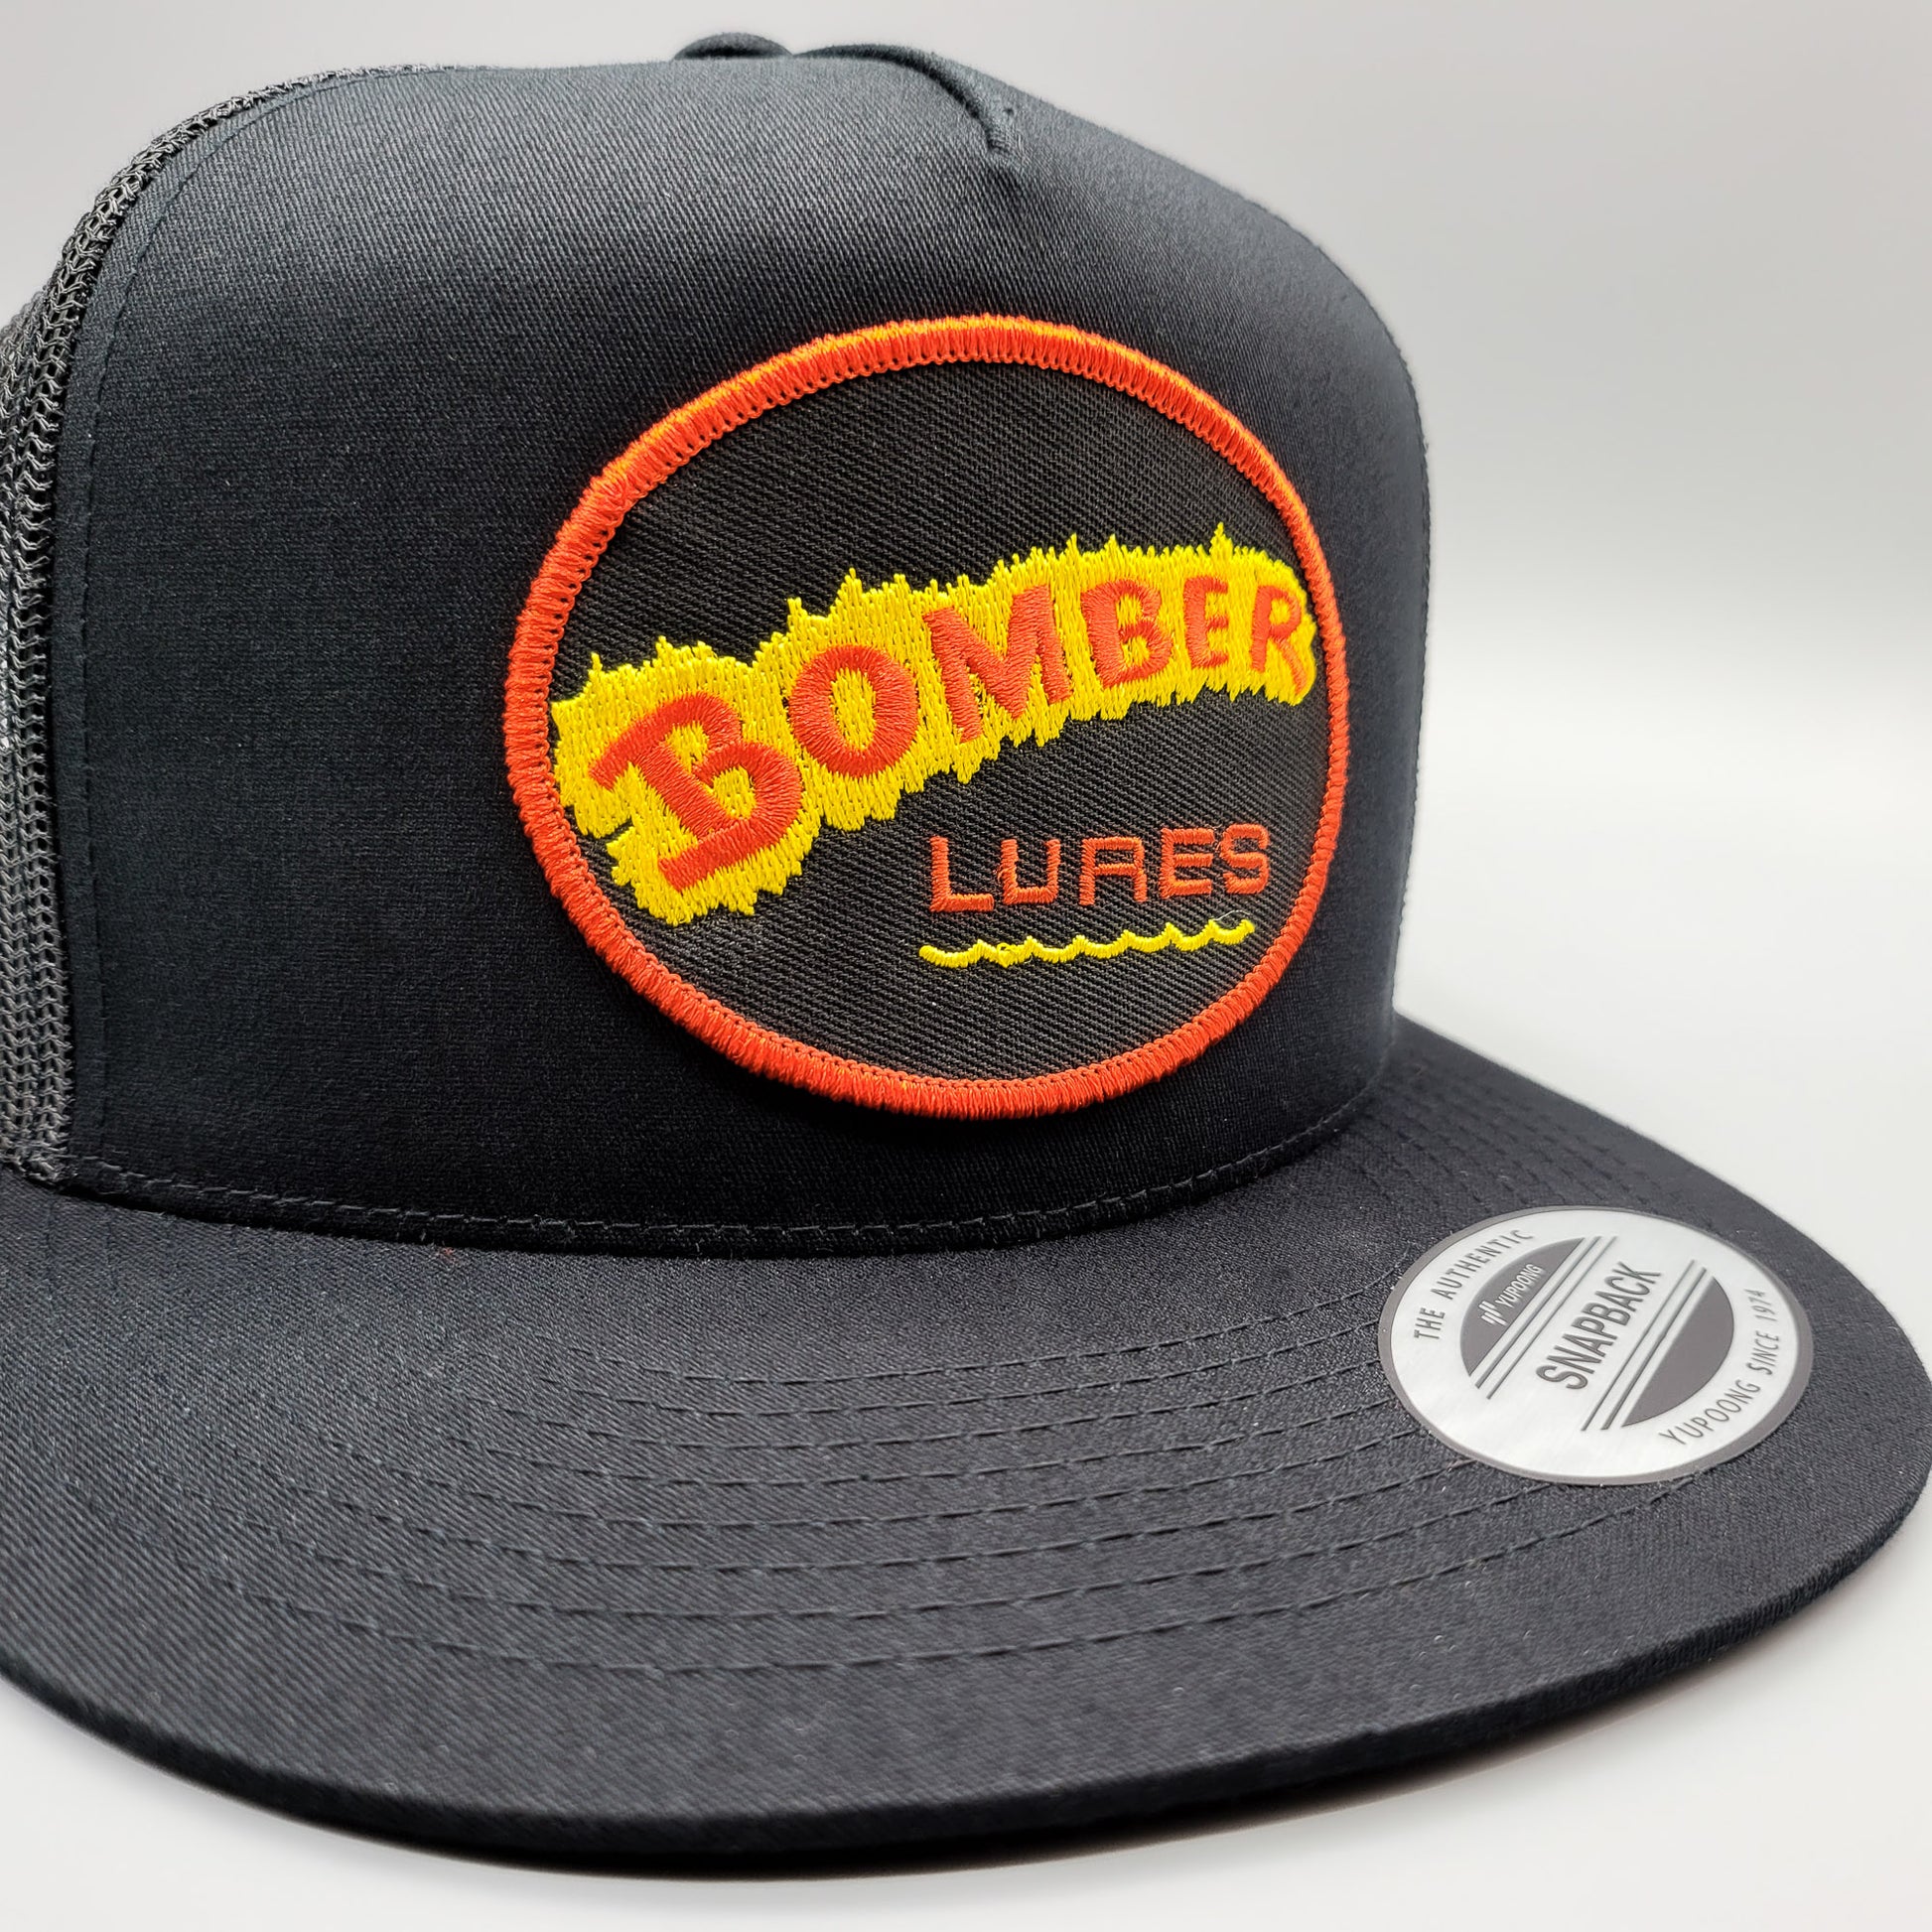 Bomber Lures Fishing Trucker Hat Retro Bass Fishing Patch Yupoong 6006 –  Vintage Truckers